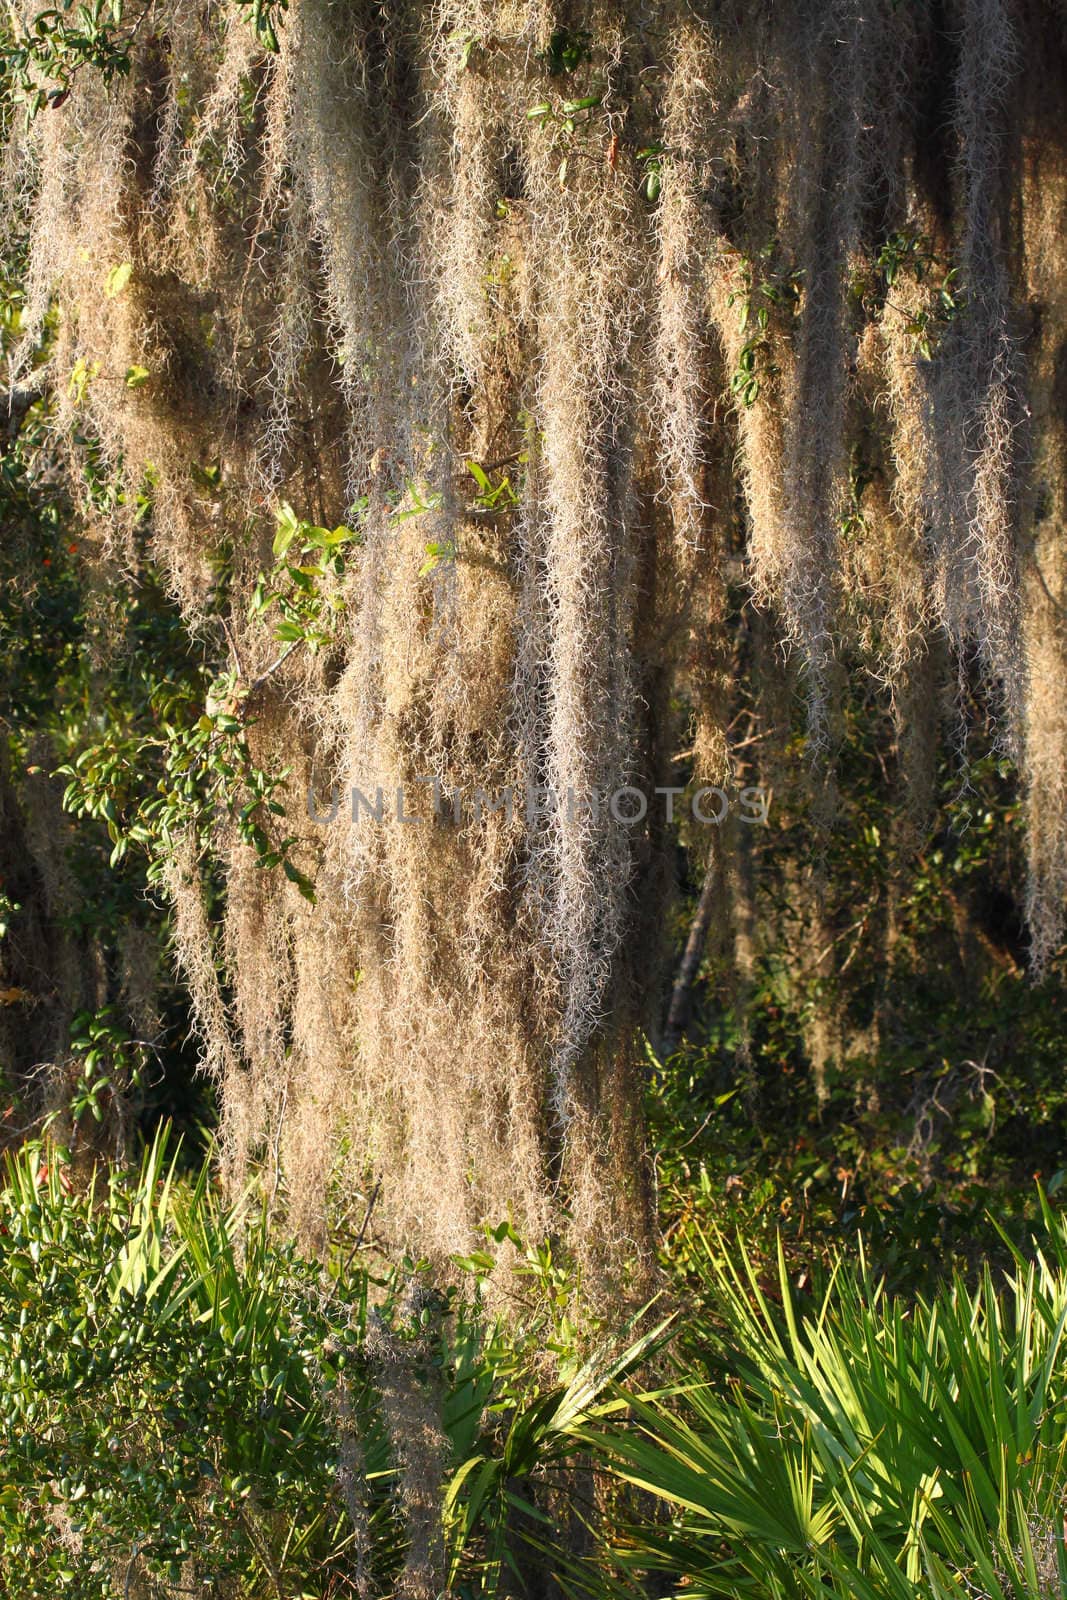 Spanish Moss (Tillandsia usneoides) grows thick in the forest of central Florida.